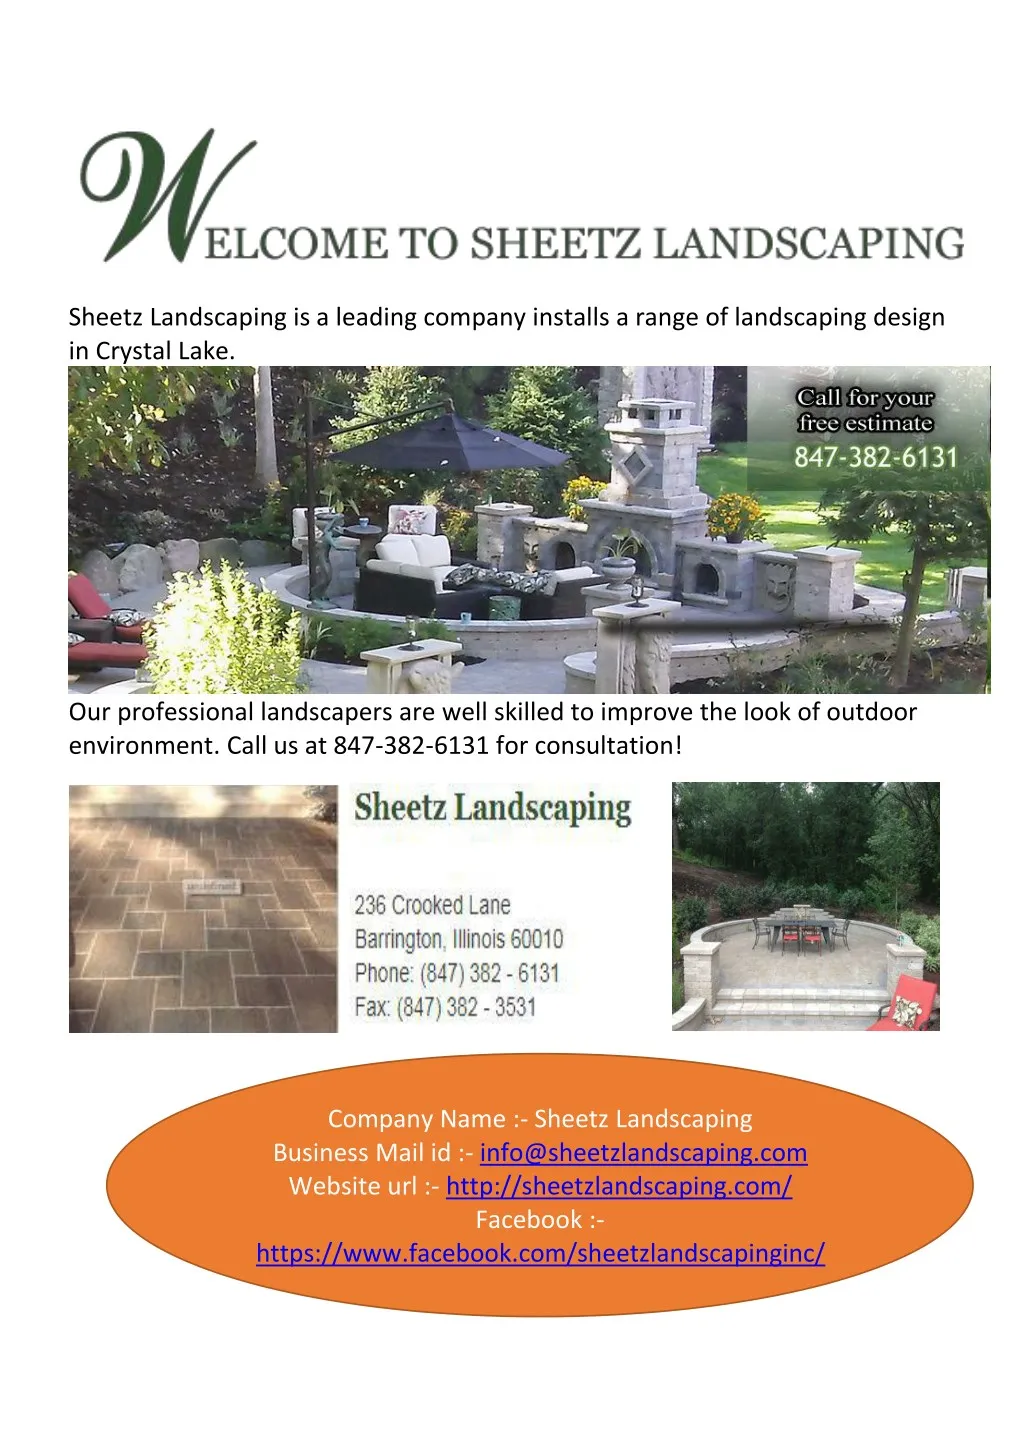 sheetz landscaping is a leading company installs